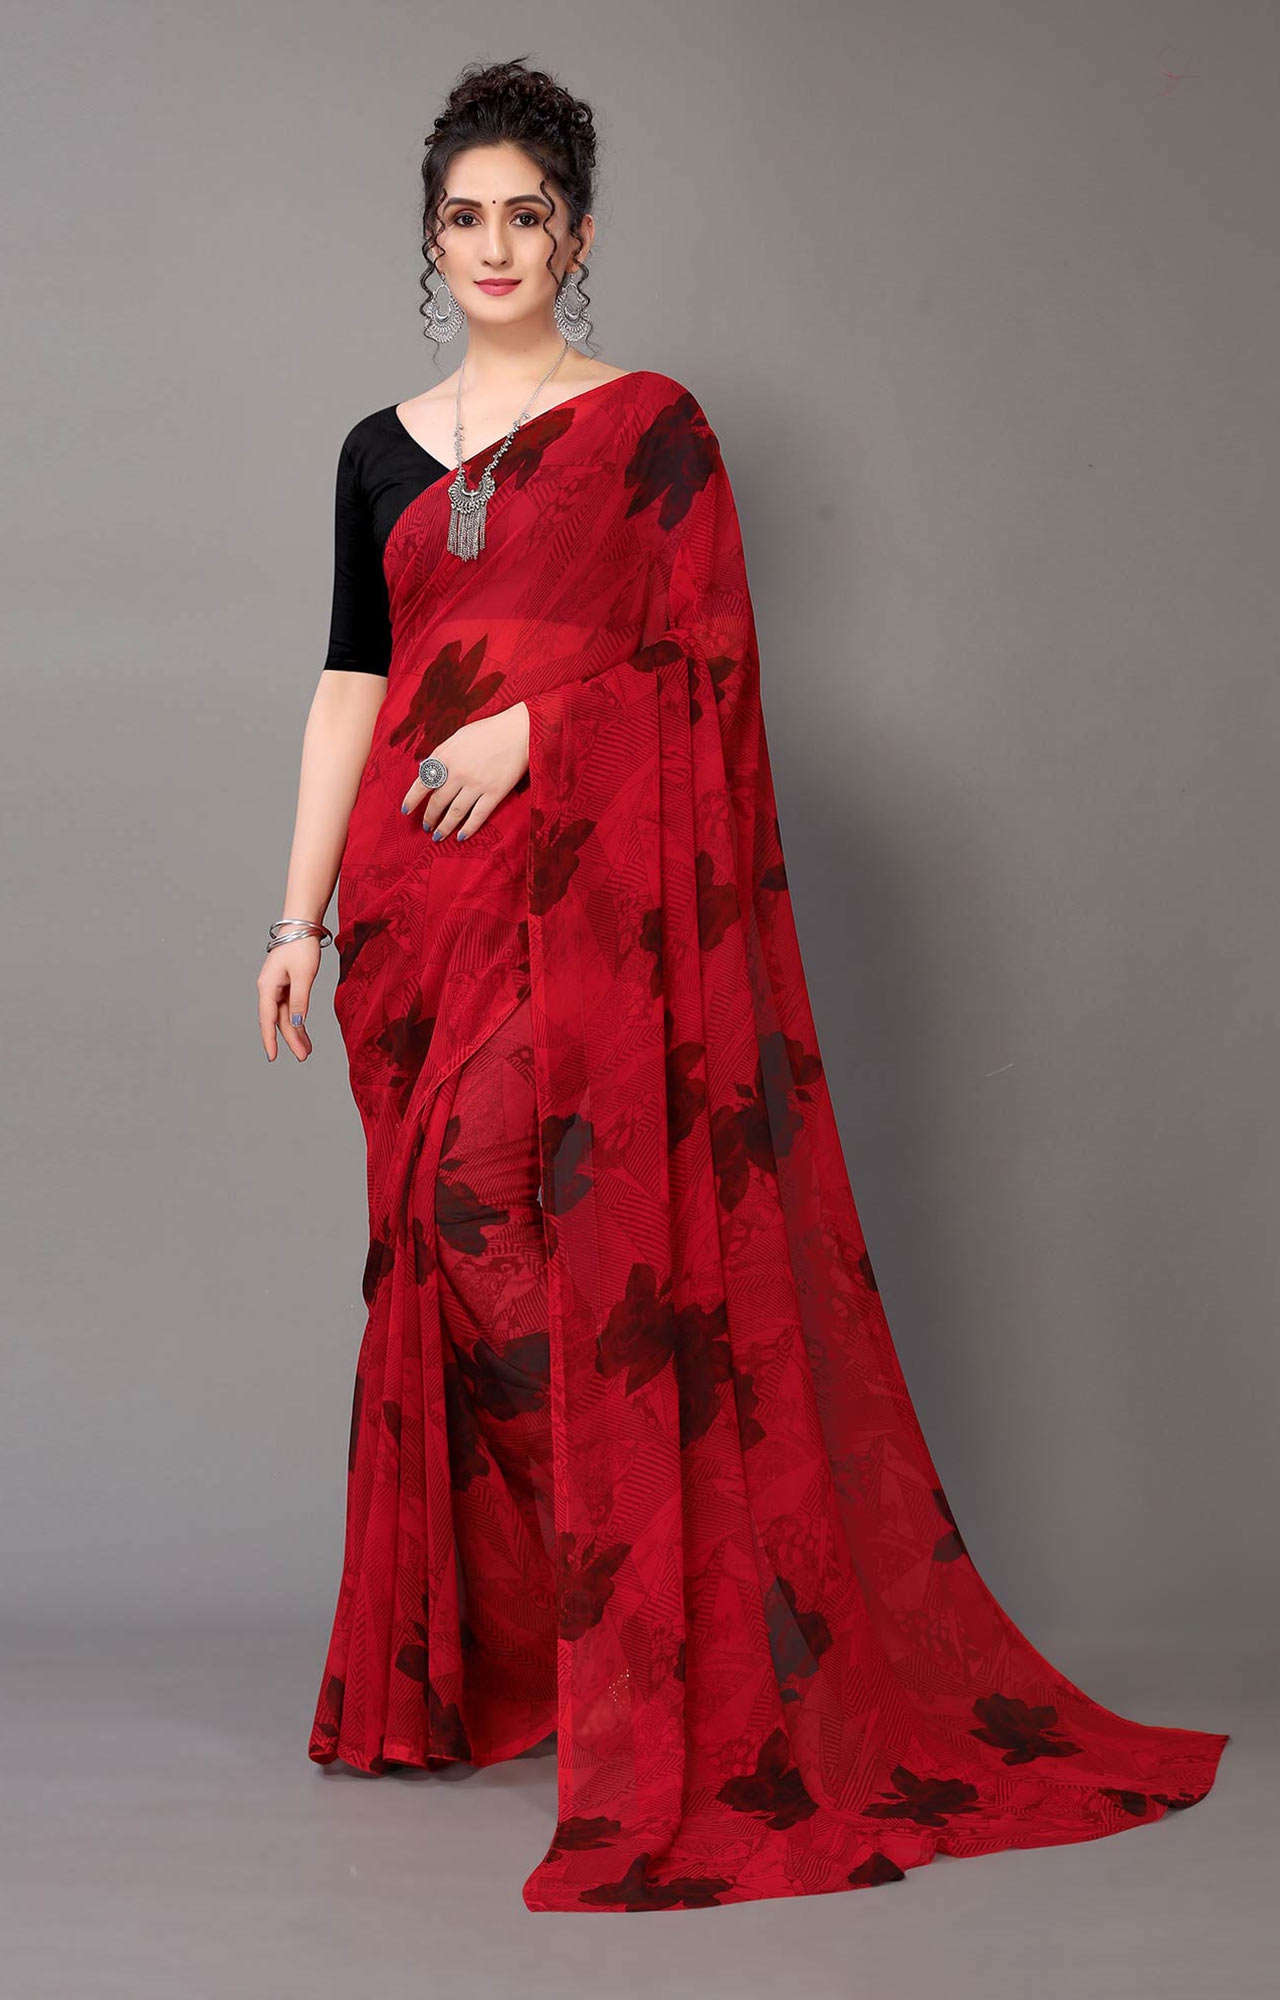 Buy TTH Women's Pure Georgette Jute Black Saree with Printed Red Border  with Blouse Piece (Saree 5.2m & Blouse 0.8m) at Amazon.in